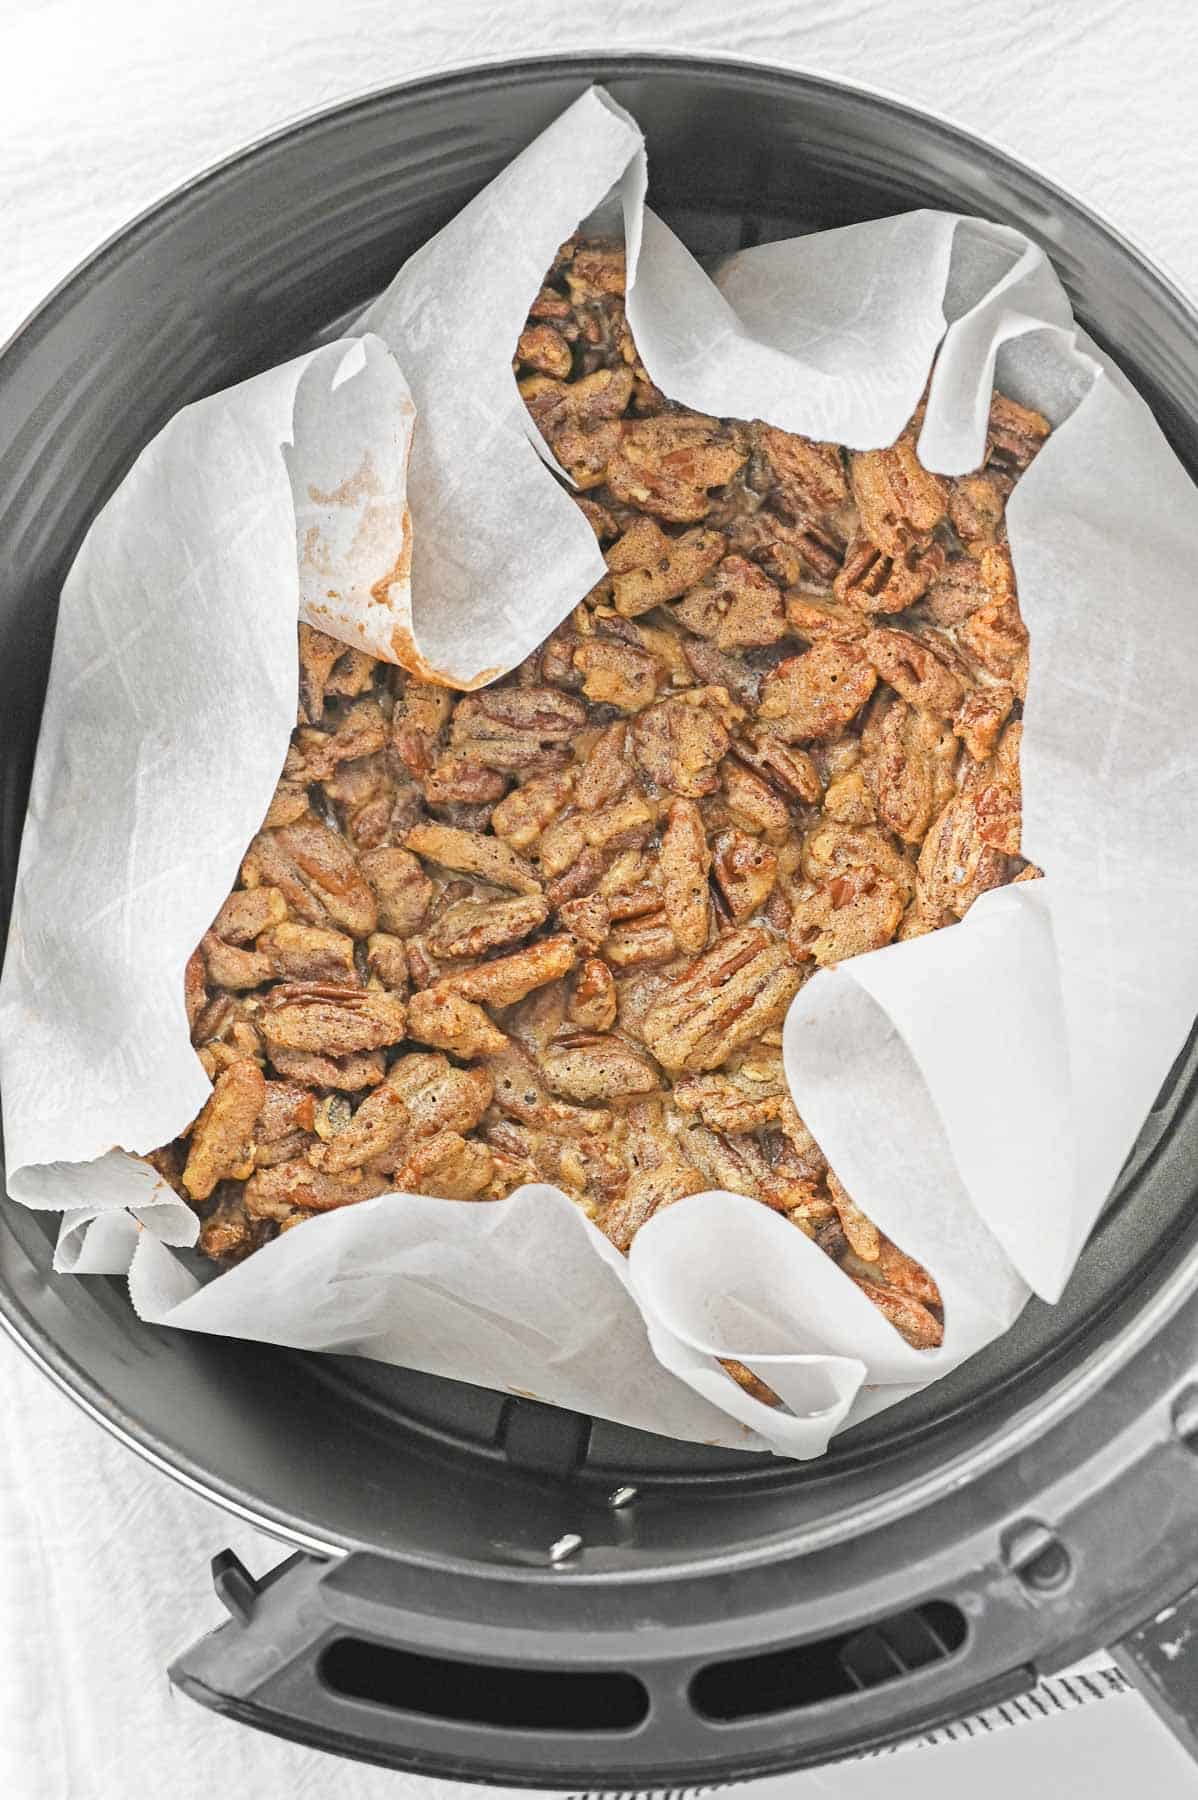 An air fryer basket filled with candied pecans.